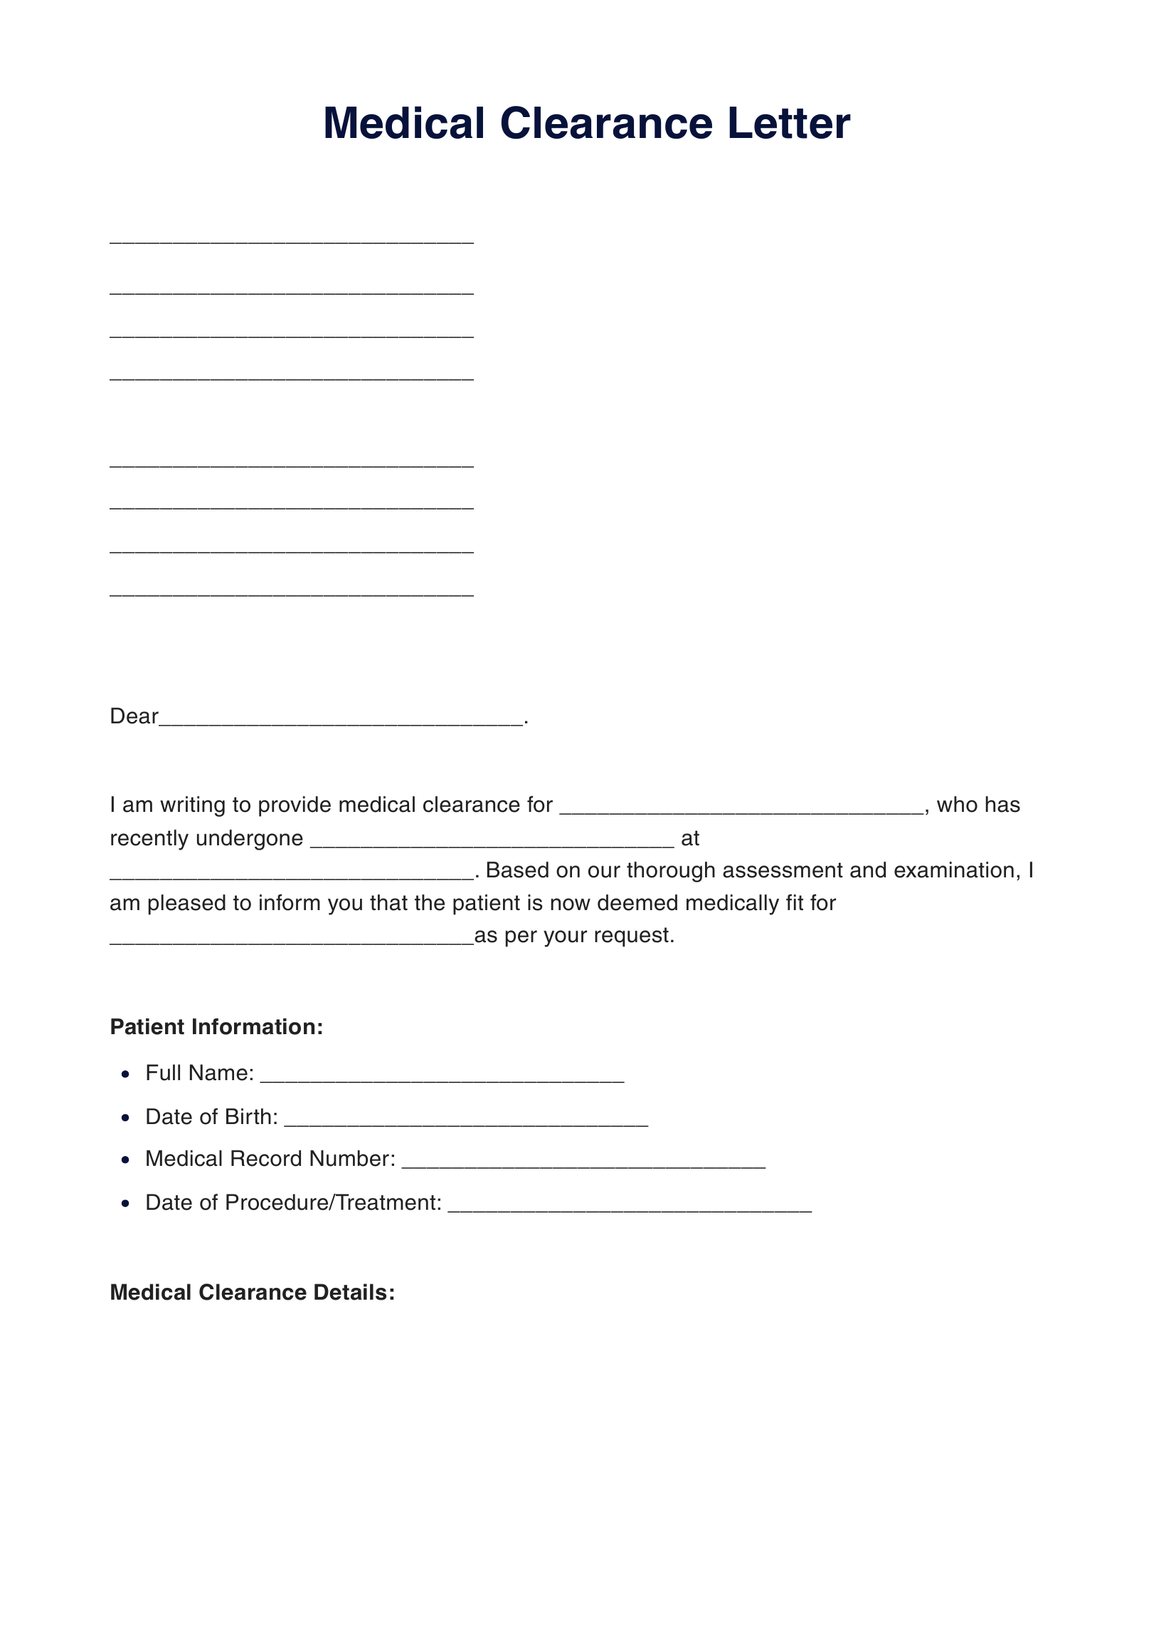 Medical Clearance Letter PDF Example